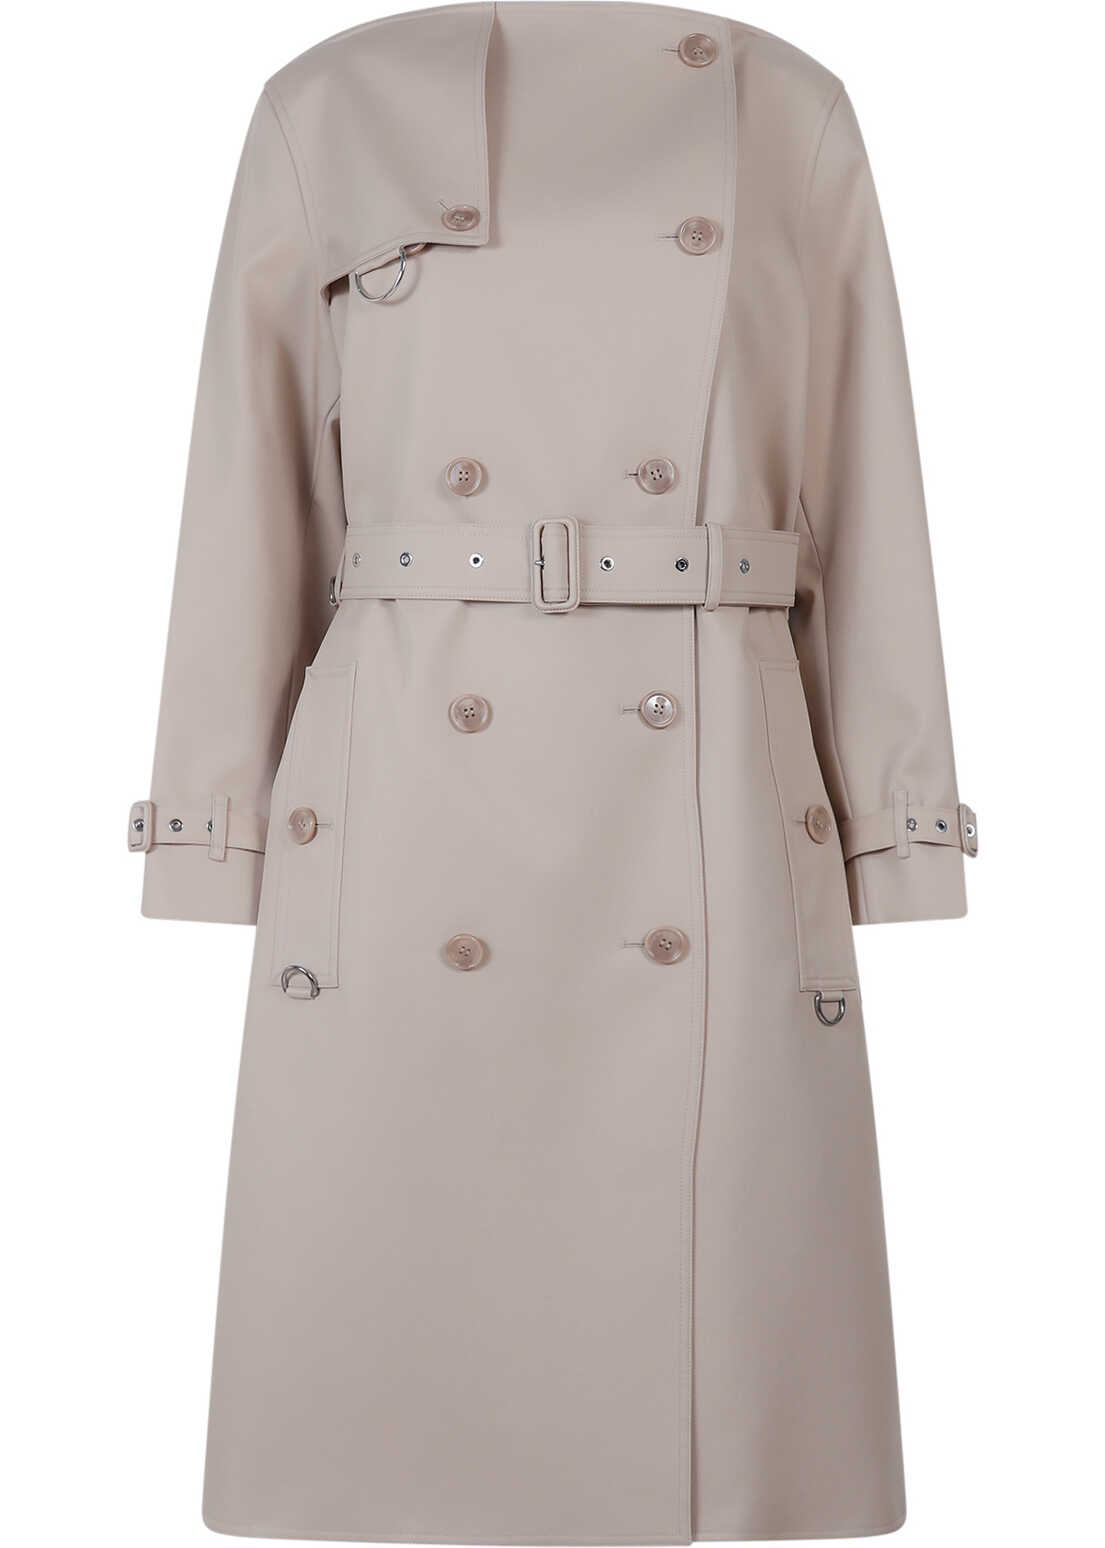 Burberry Trench Beige image0